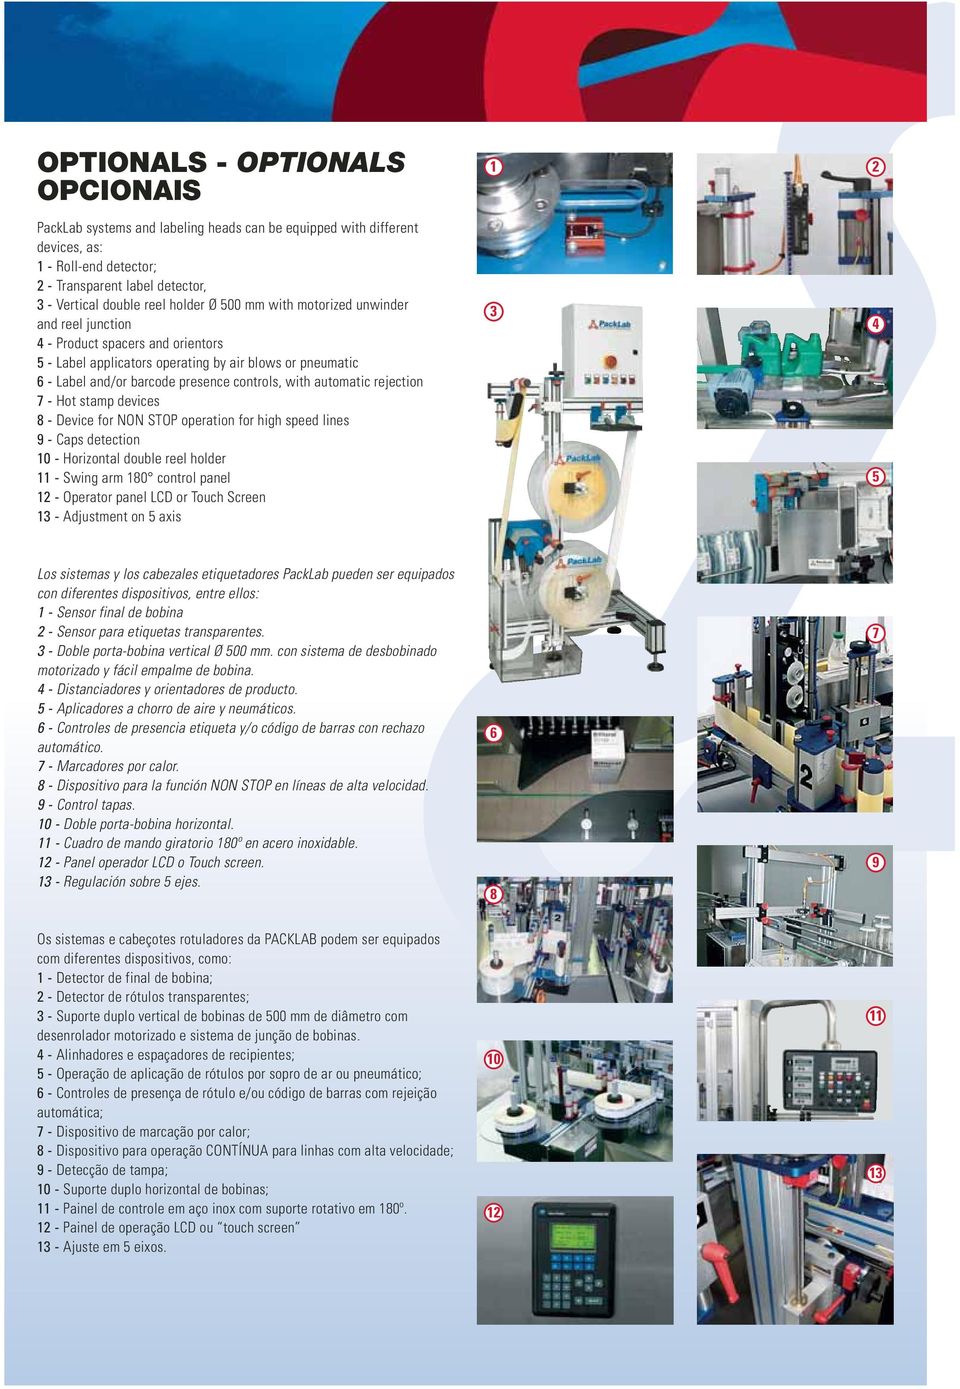 automatic rejection 7 - Hot stamp devices 8 - Device for NON STOP operation for high speed lines 9 - Caps detection 10 - Horizontal double reel holder 11 - Swing arm 180 control panel 12 - Operator